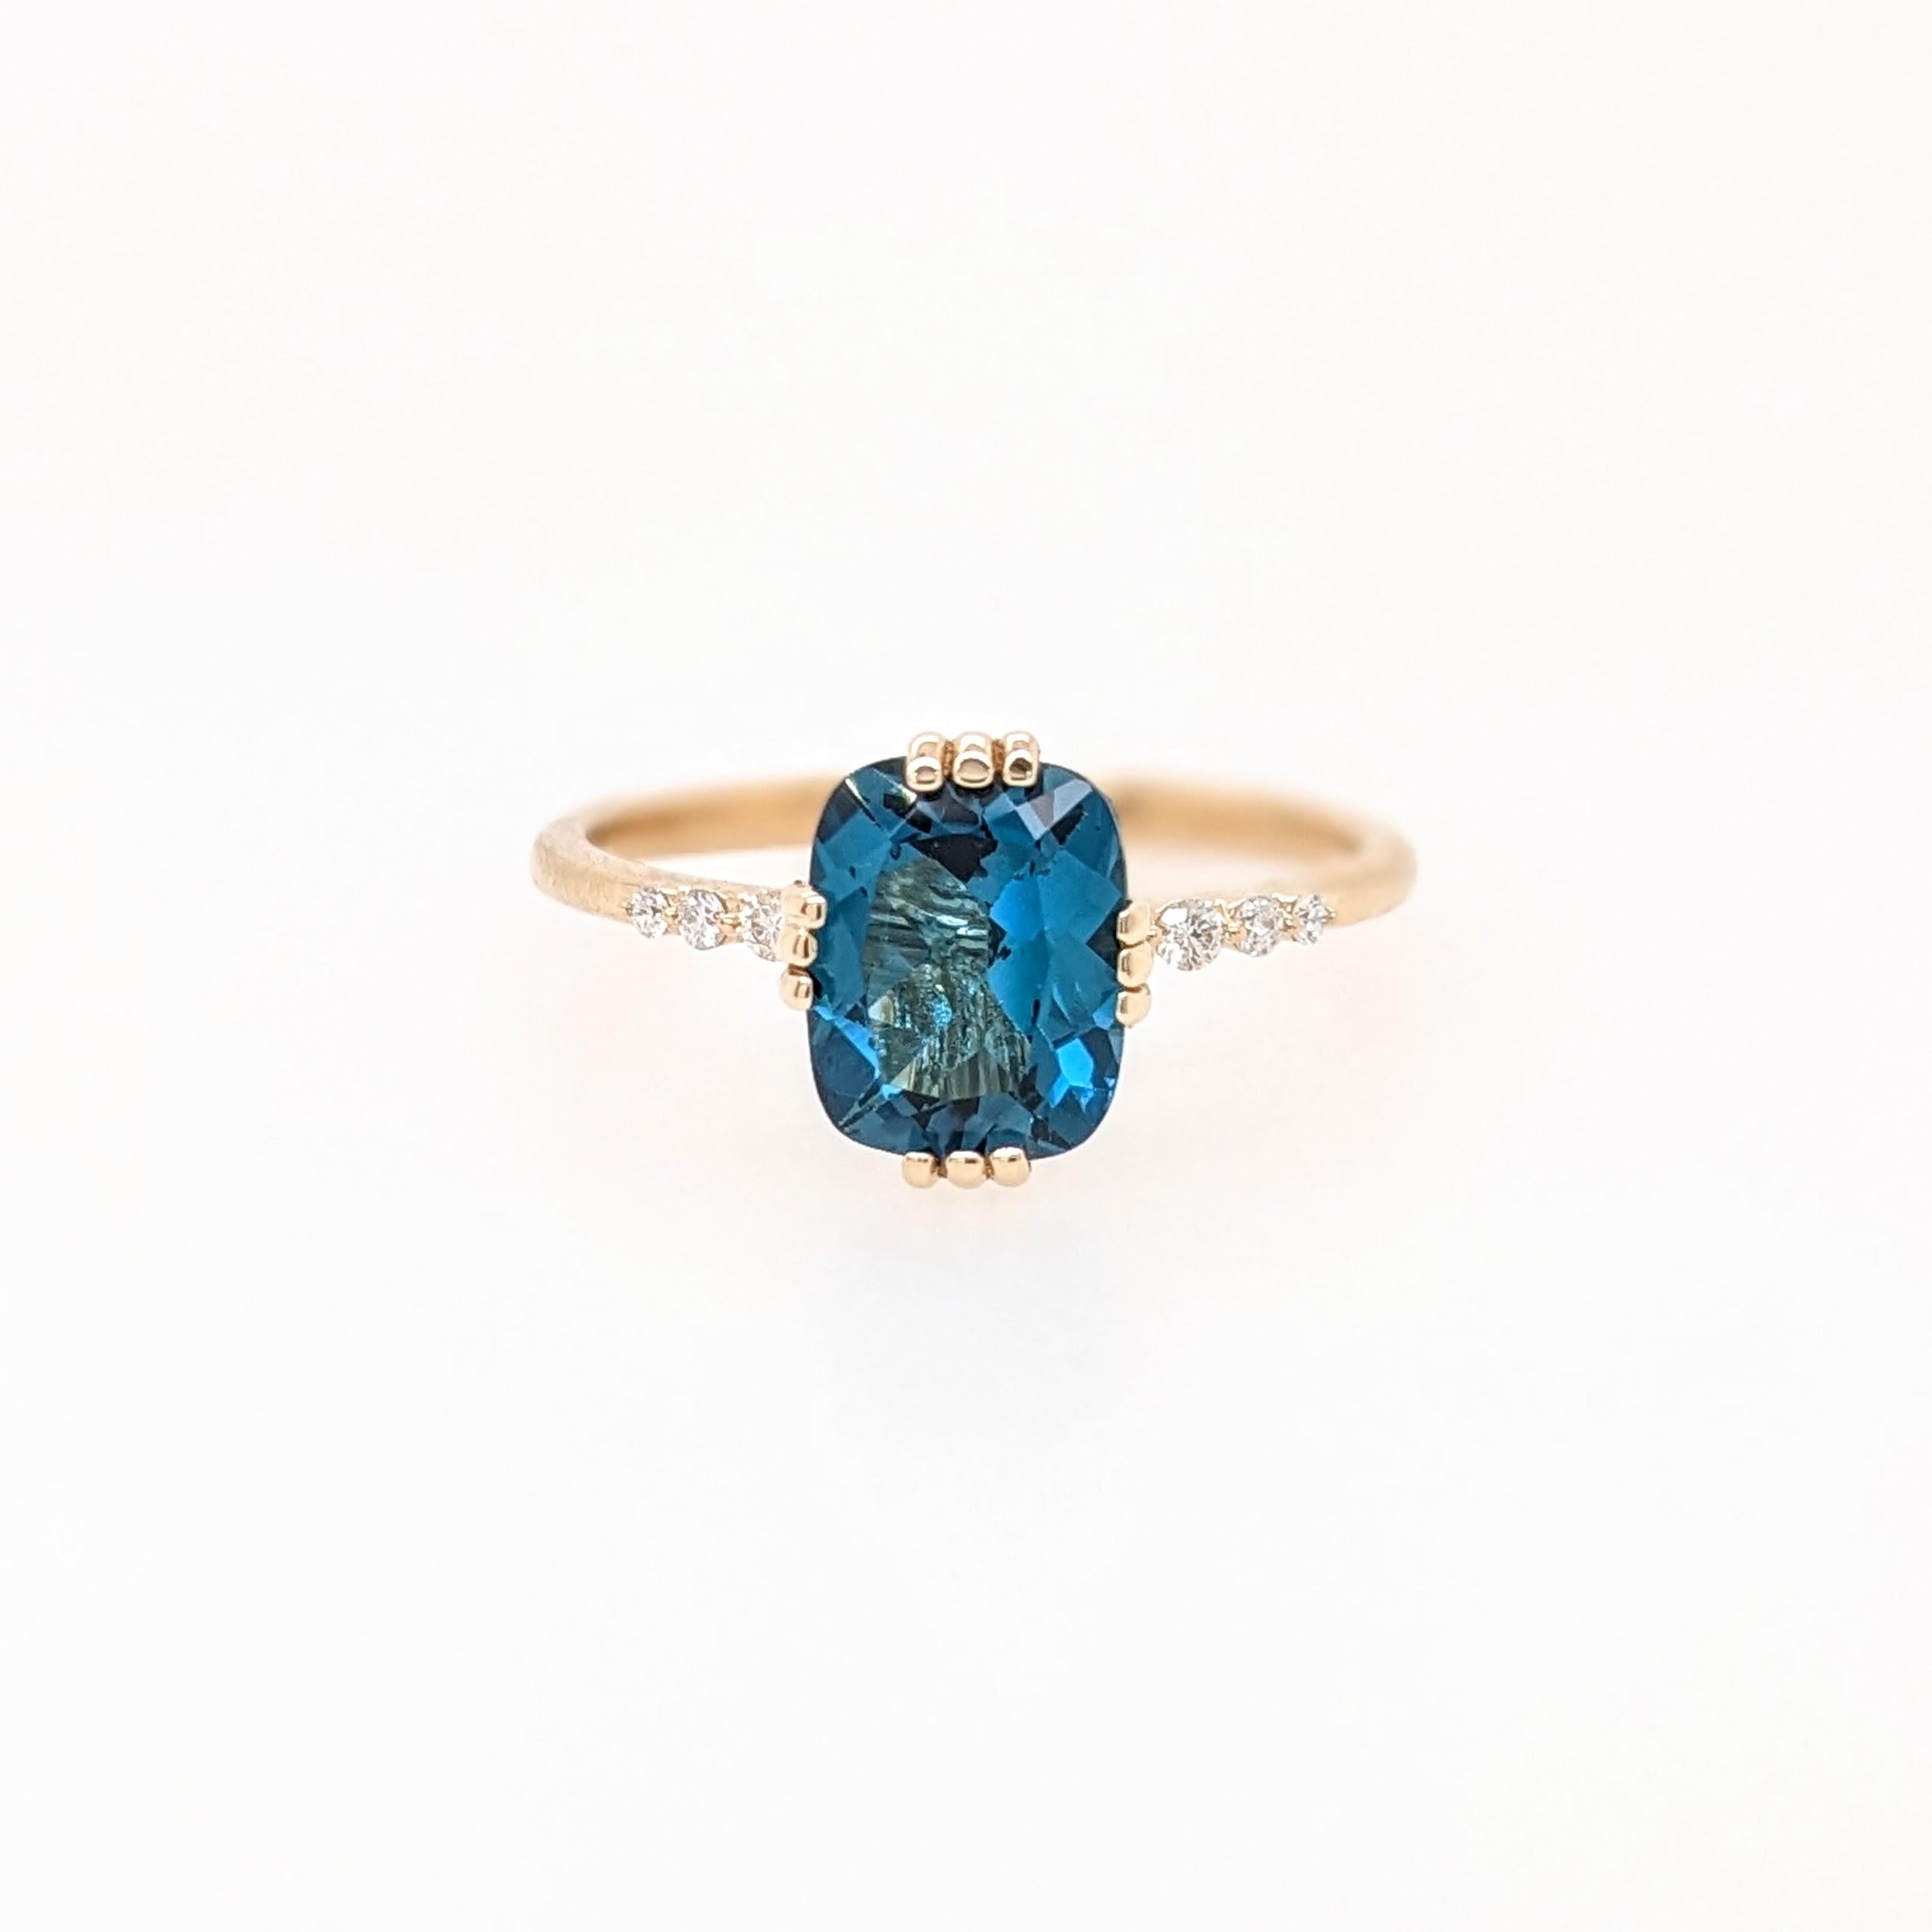 2.4ct London Blue Topaz Ring w Natural Diamonds in Solid 14K Gold Cushion 9x7mm